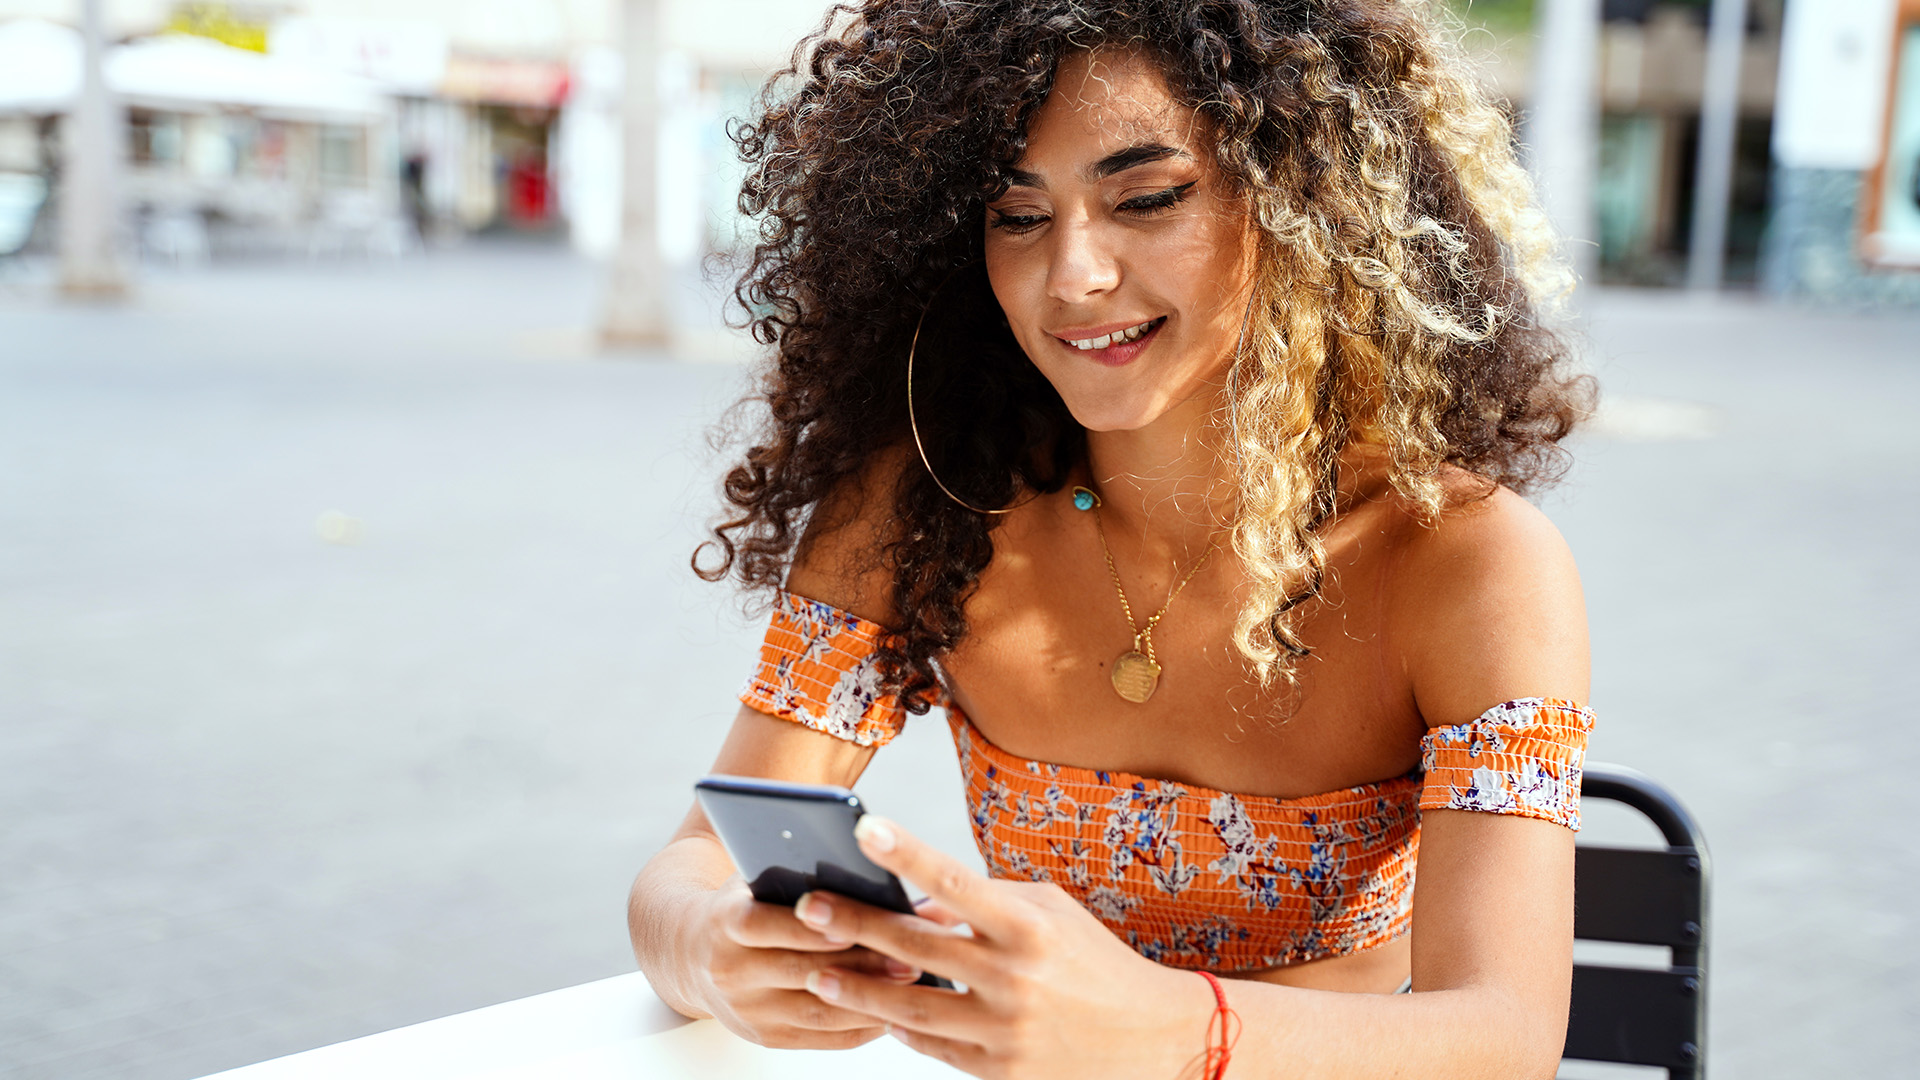 Curly-haired brunette woman sitting on a table in public and biting her lower lip while looking at her phone.